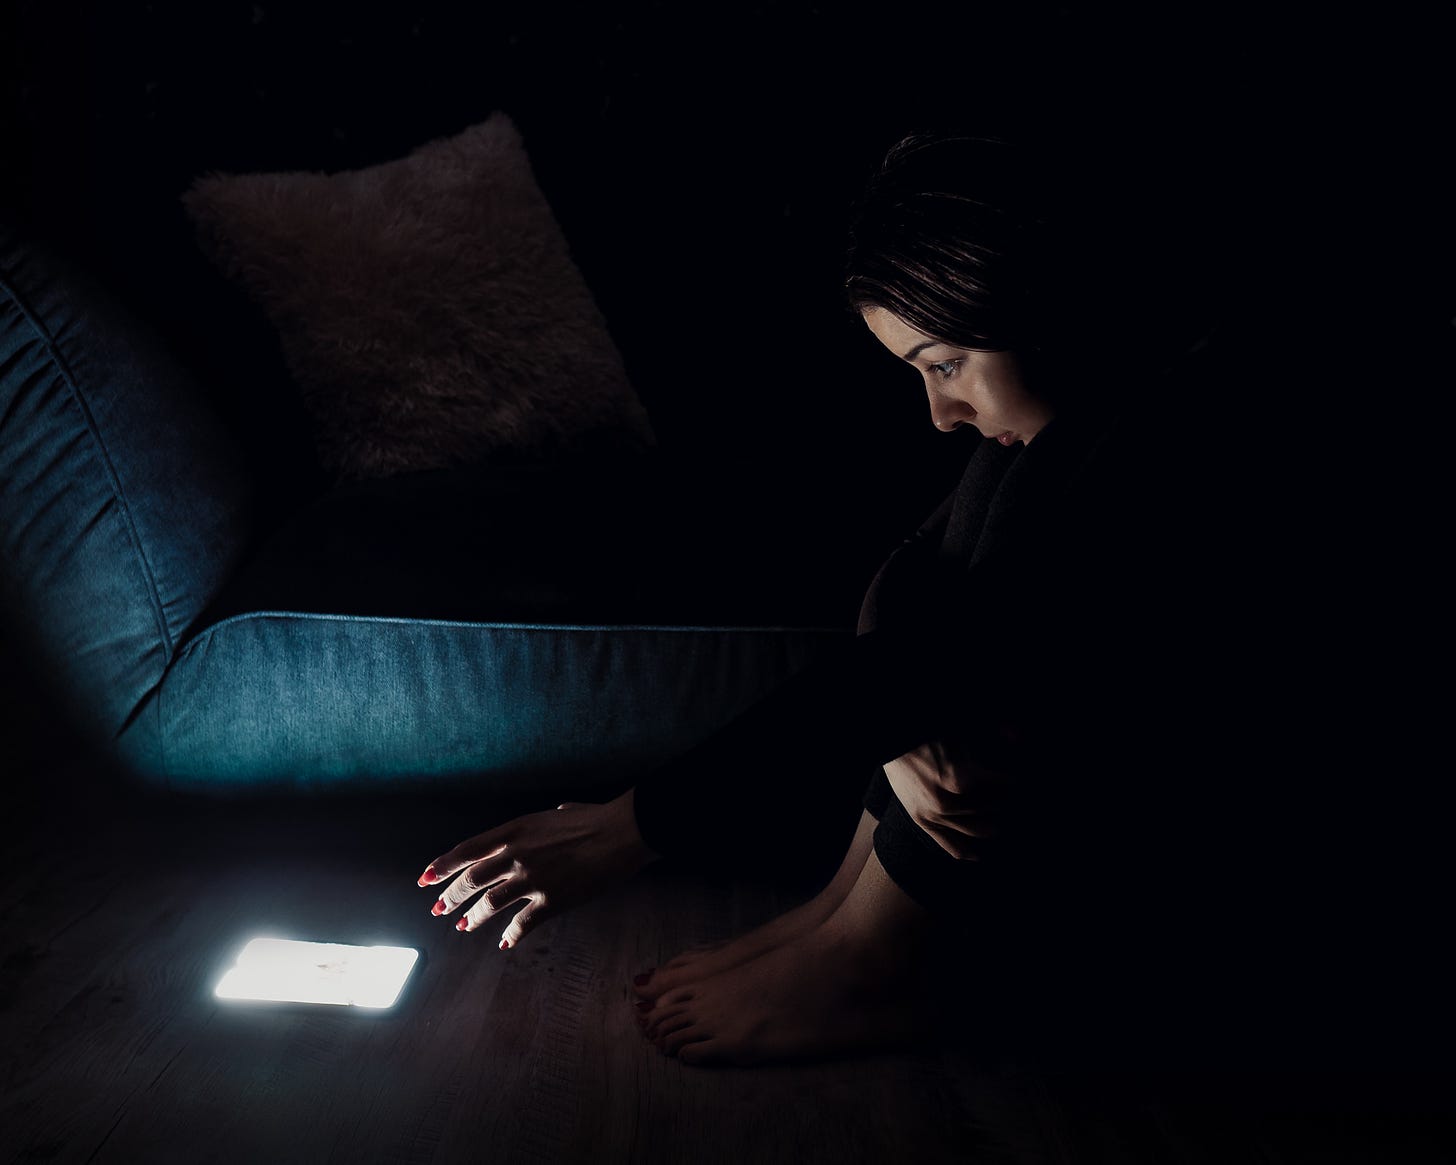 An image of a woman in the dark, reaching for her smartphone